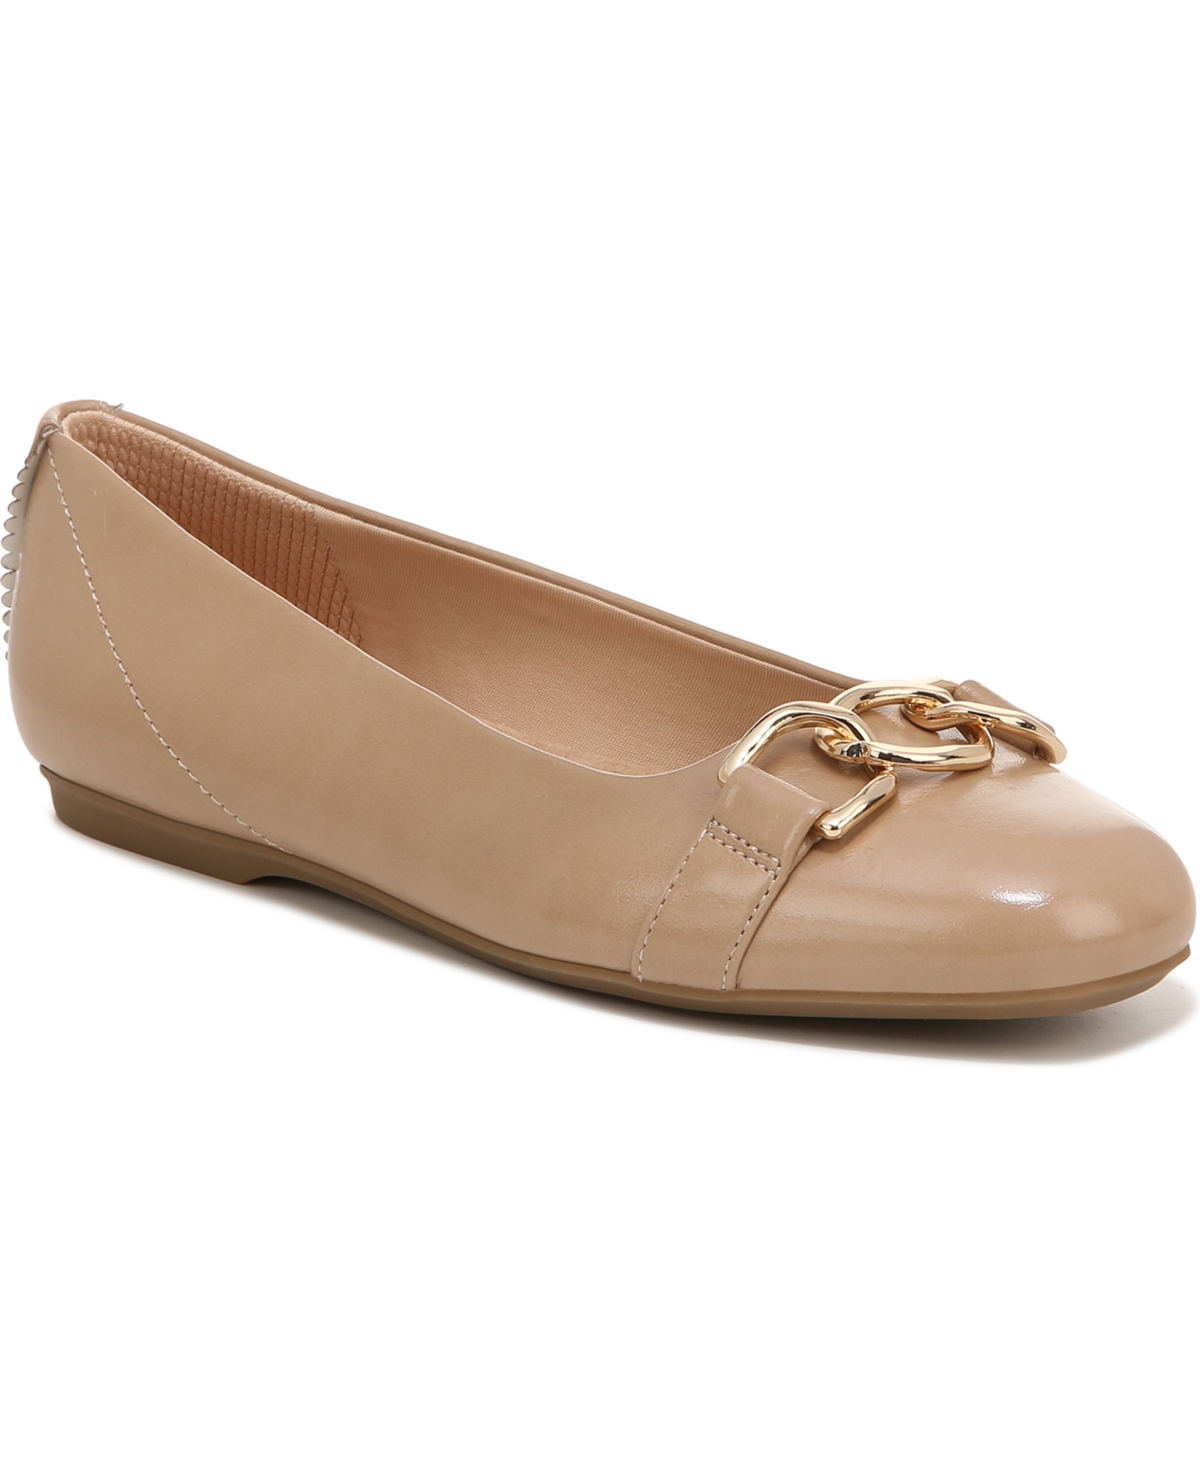 Women's Wexley Adorn Flats - Taupe Faux Patent